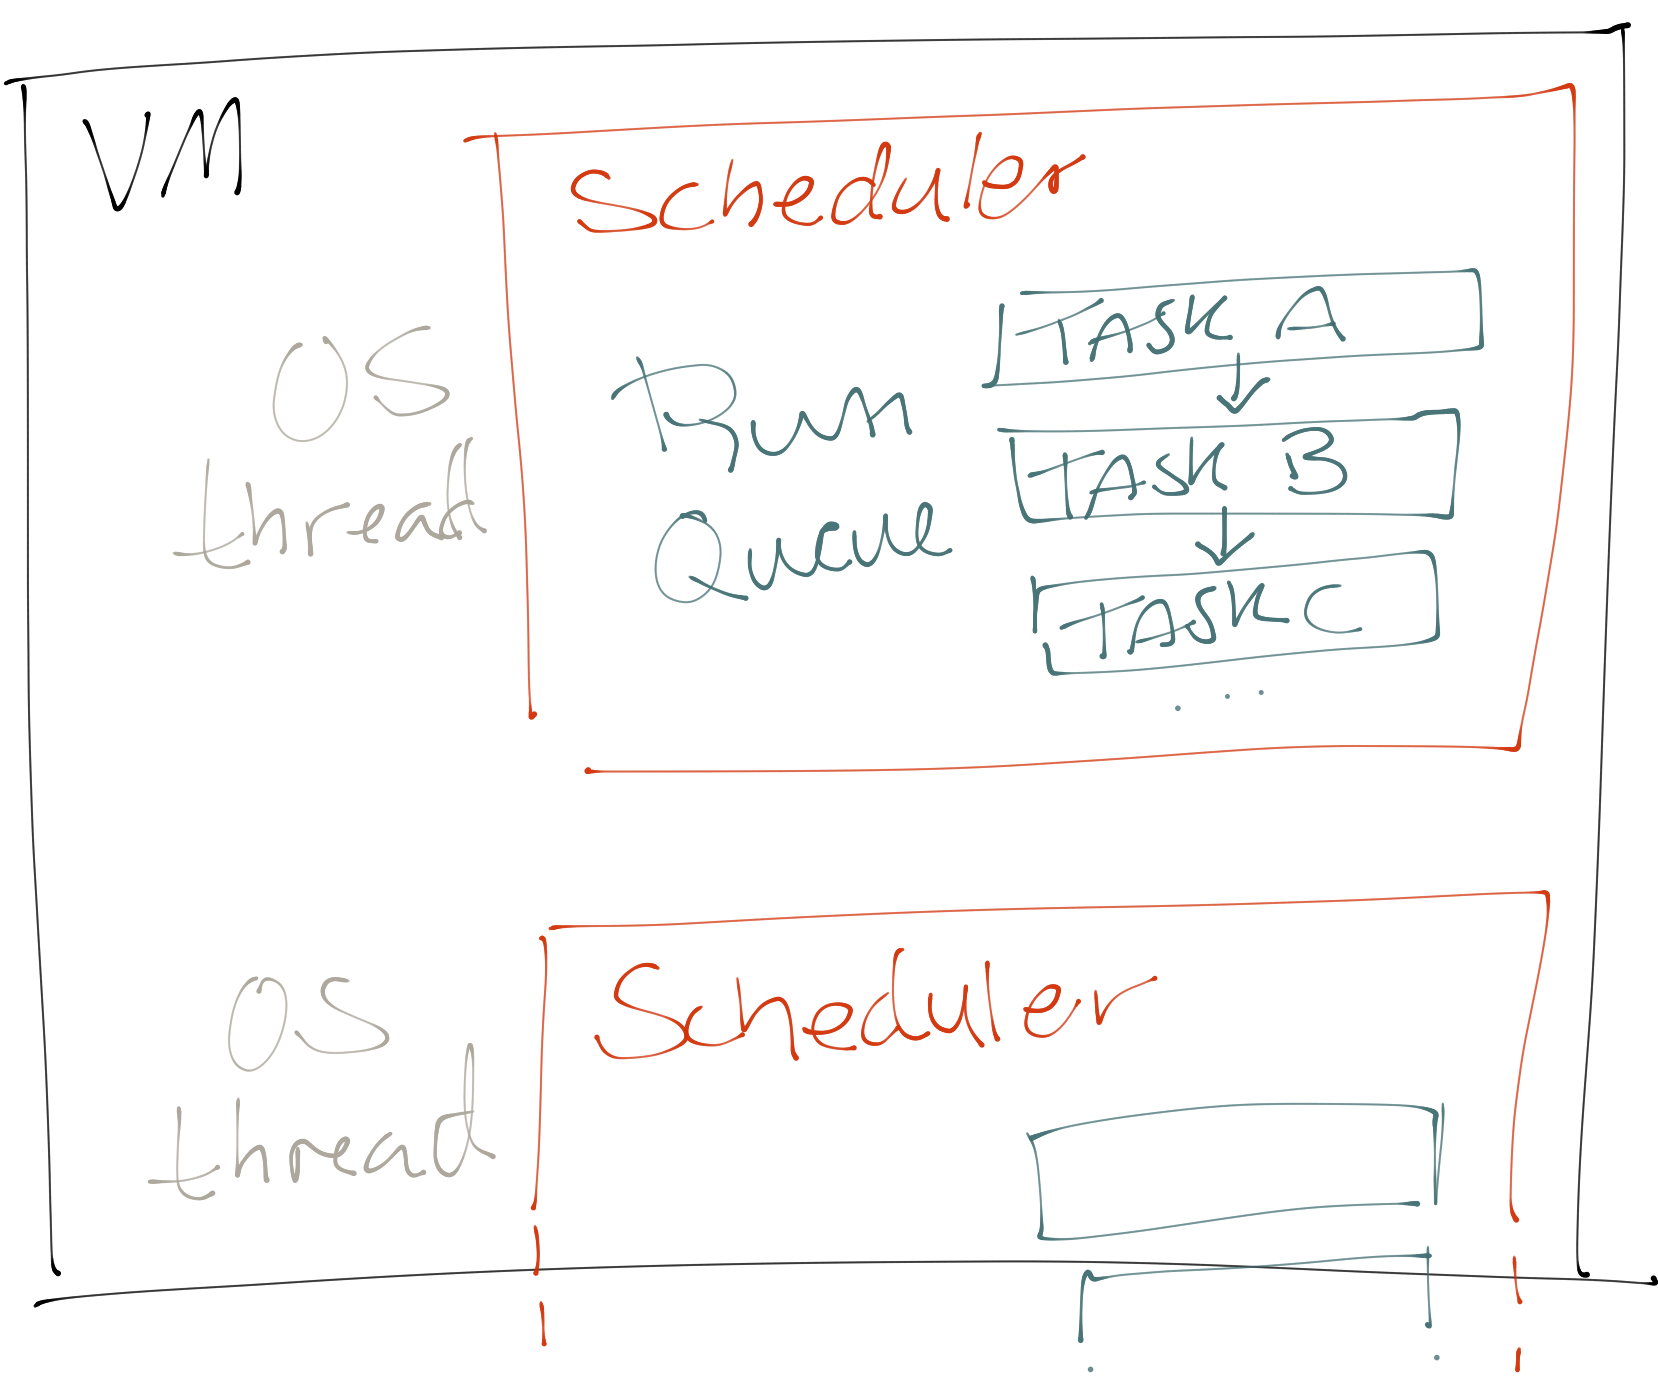 Sketch of the VM with schedulers